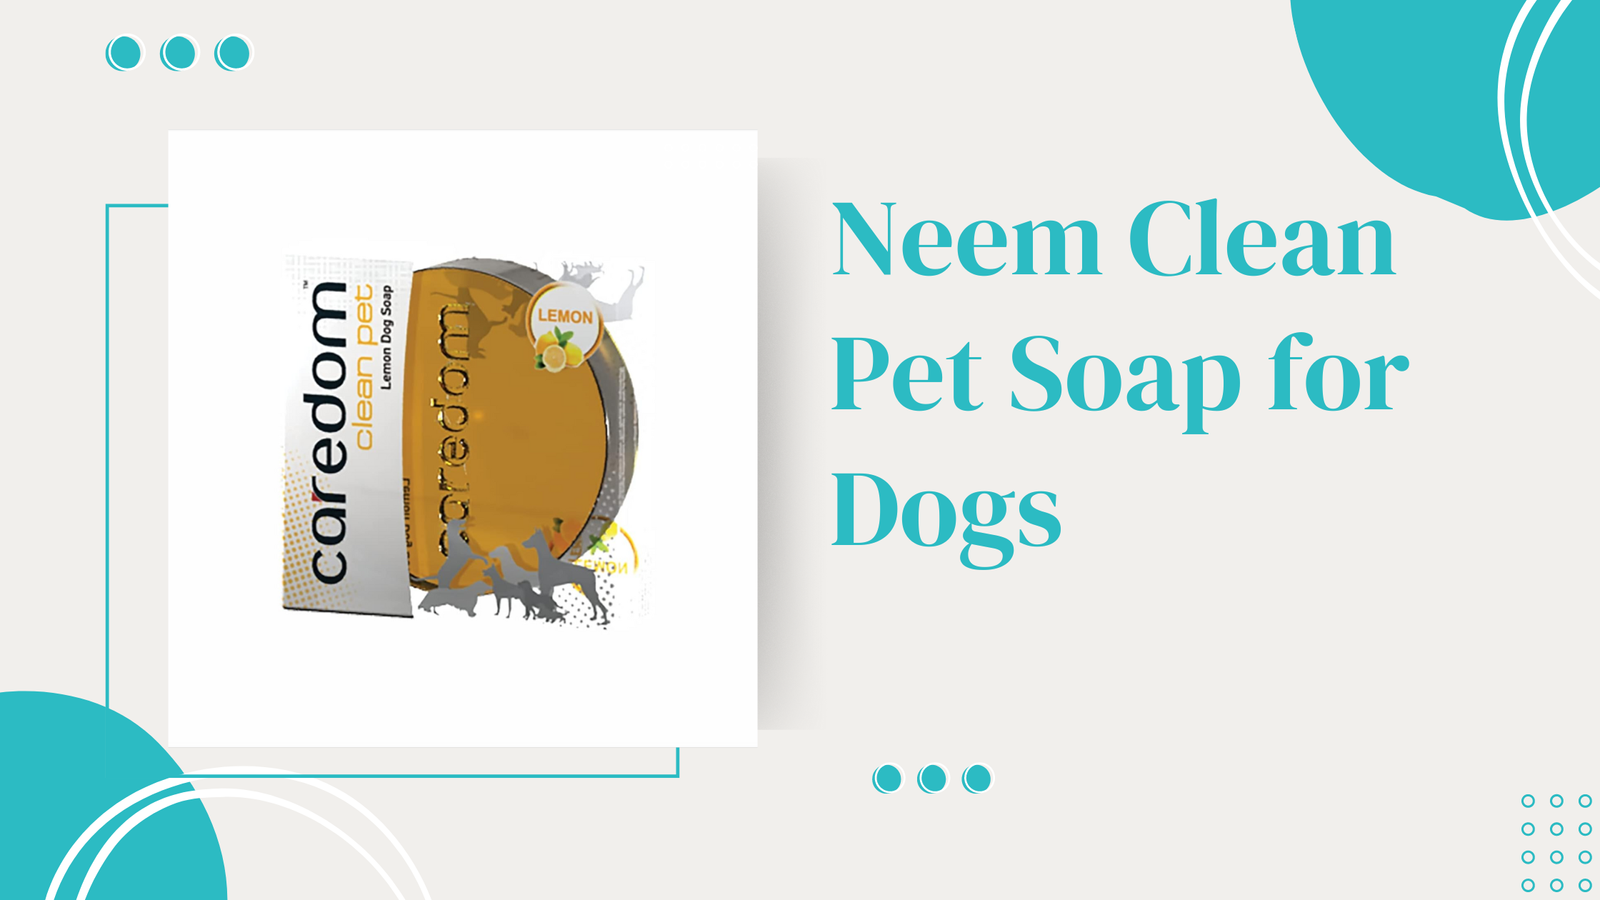 Neem Clean Pet Soap for Dogs - Natural Skin Care Solution